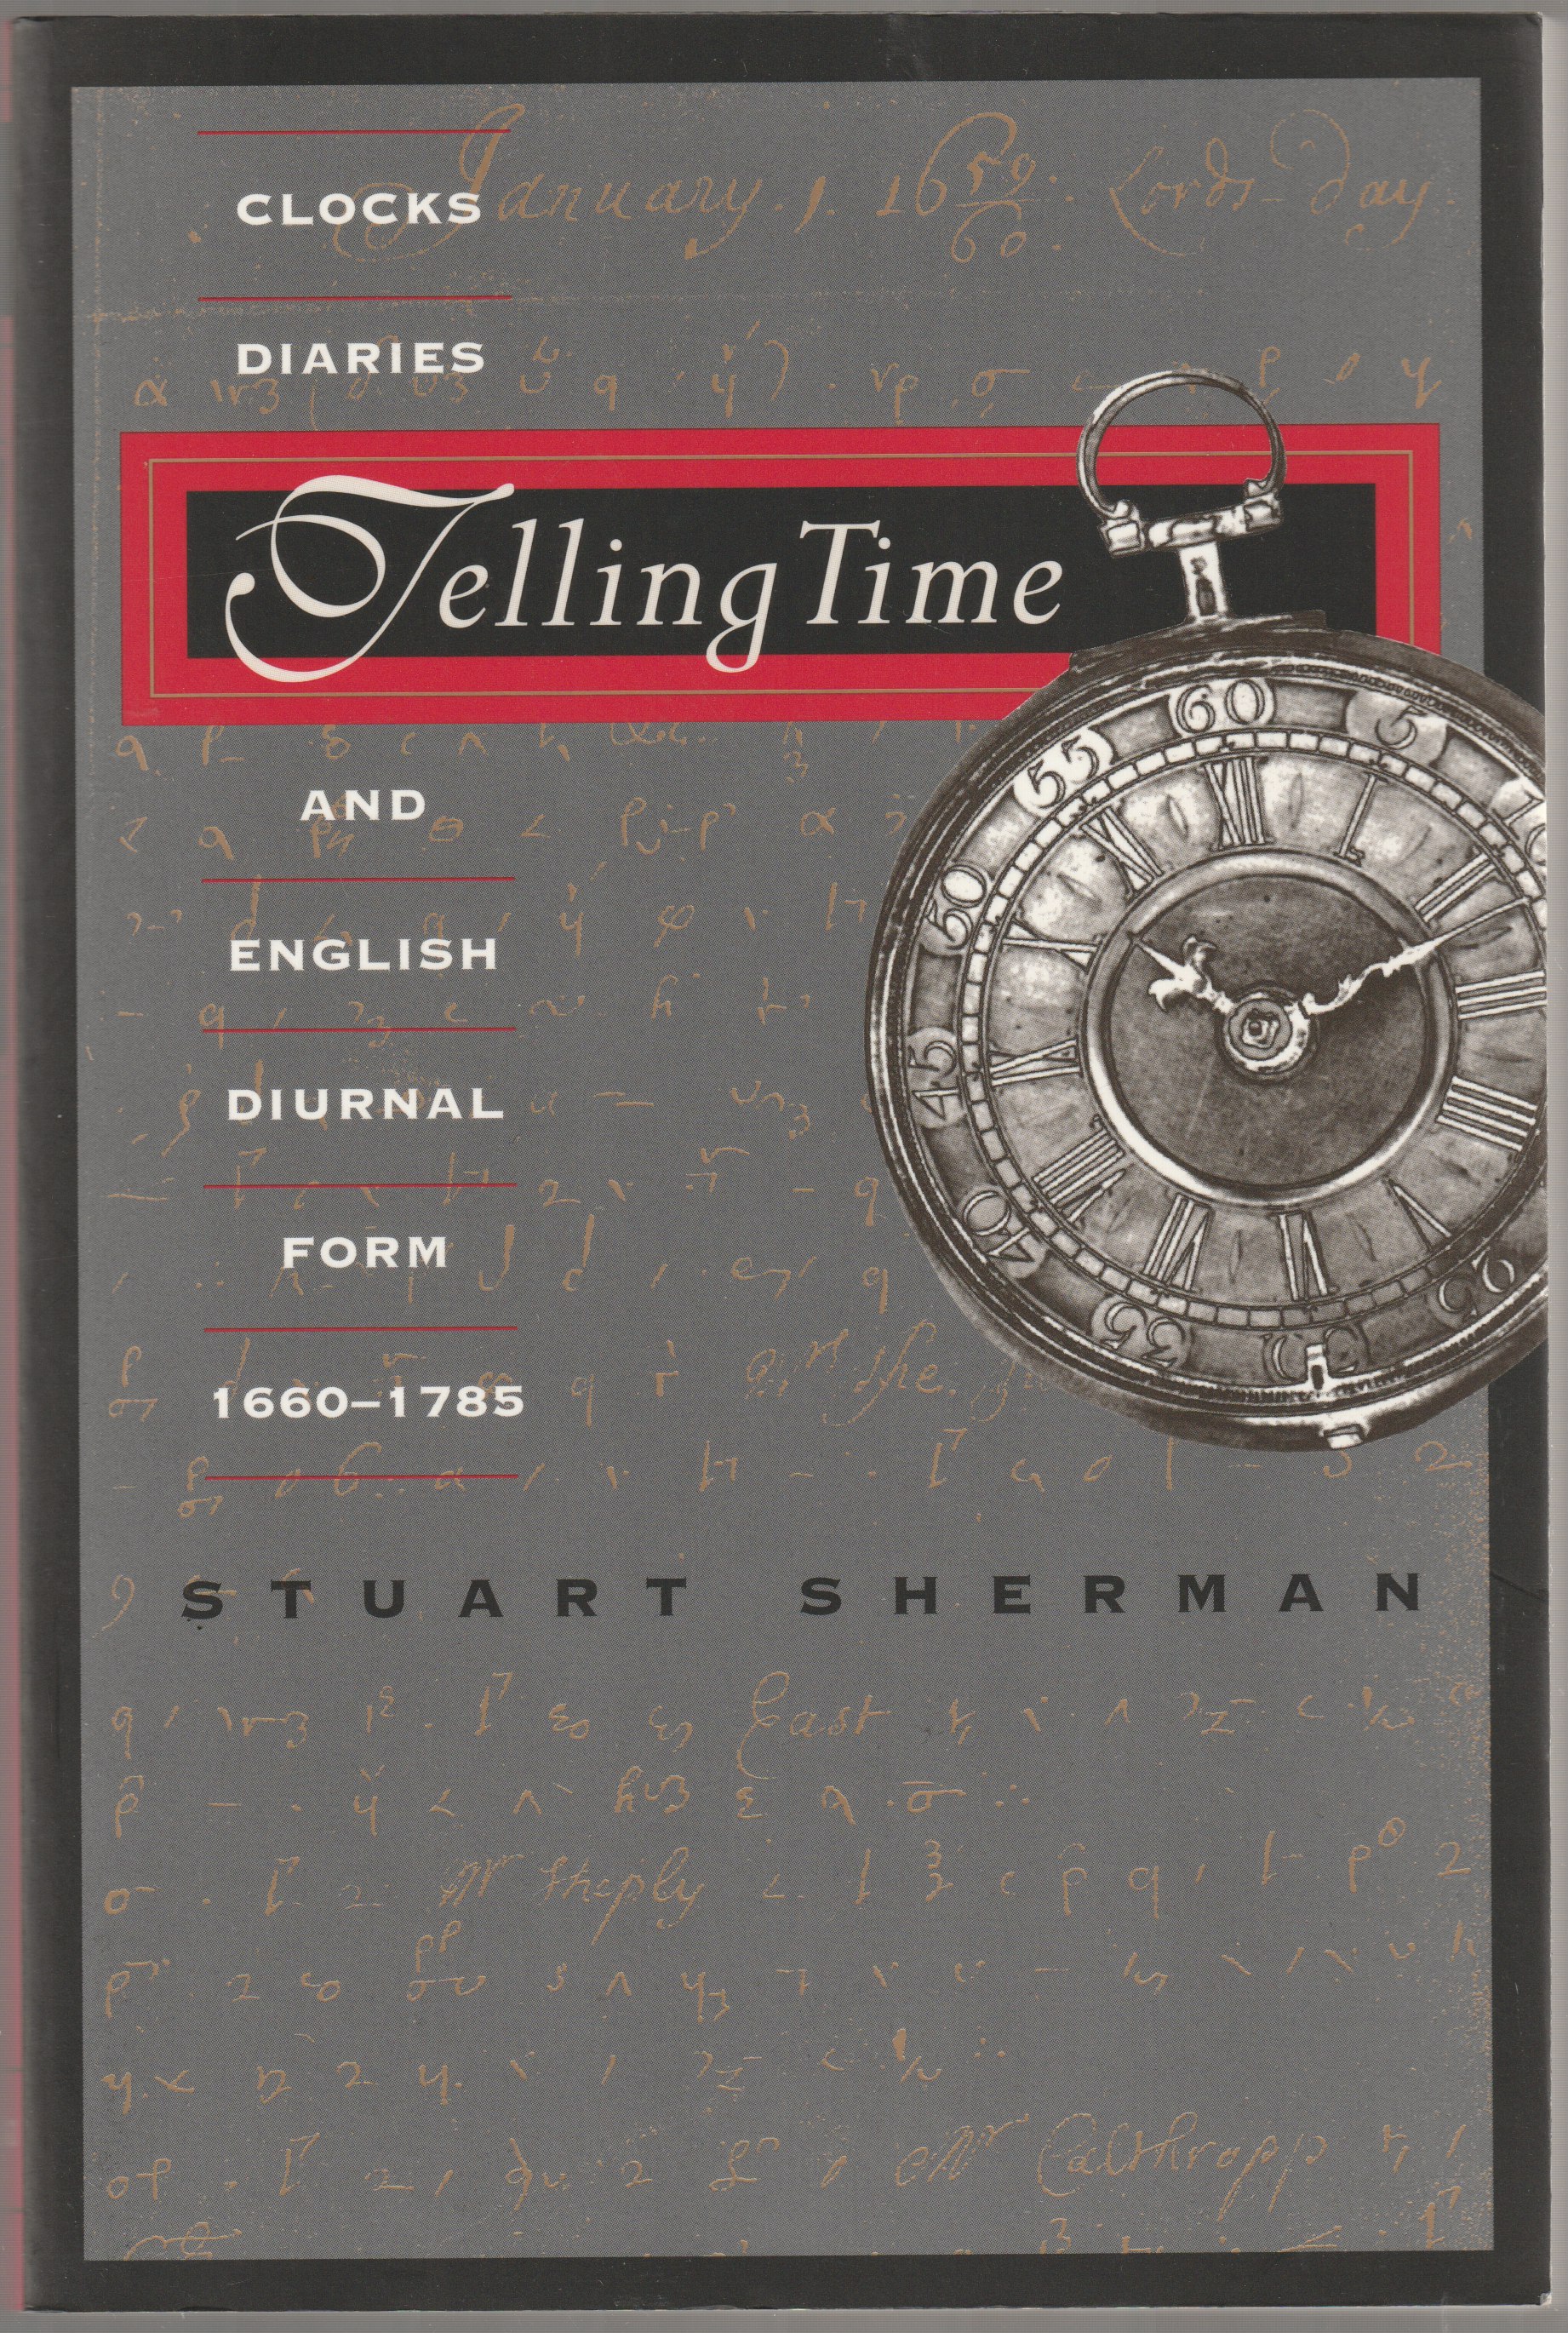 Telling time : clocks, diaries, and English diurnal form, 1660-1785